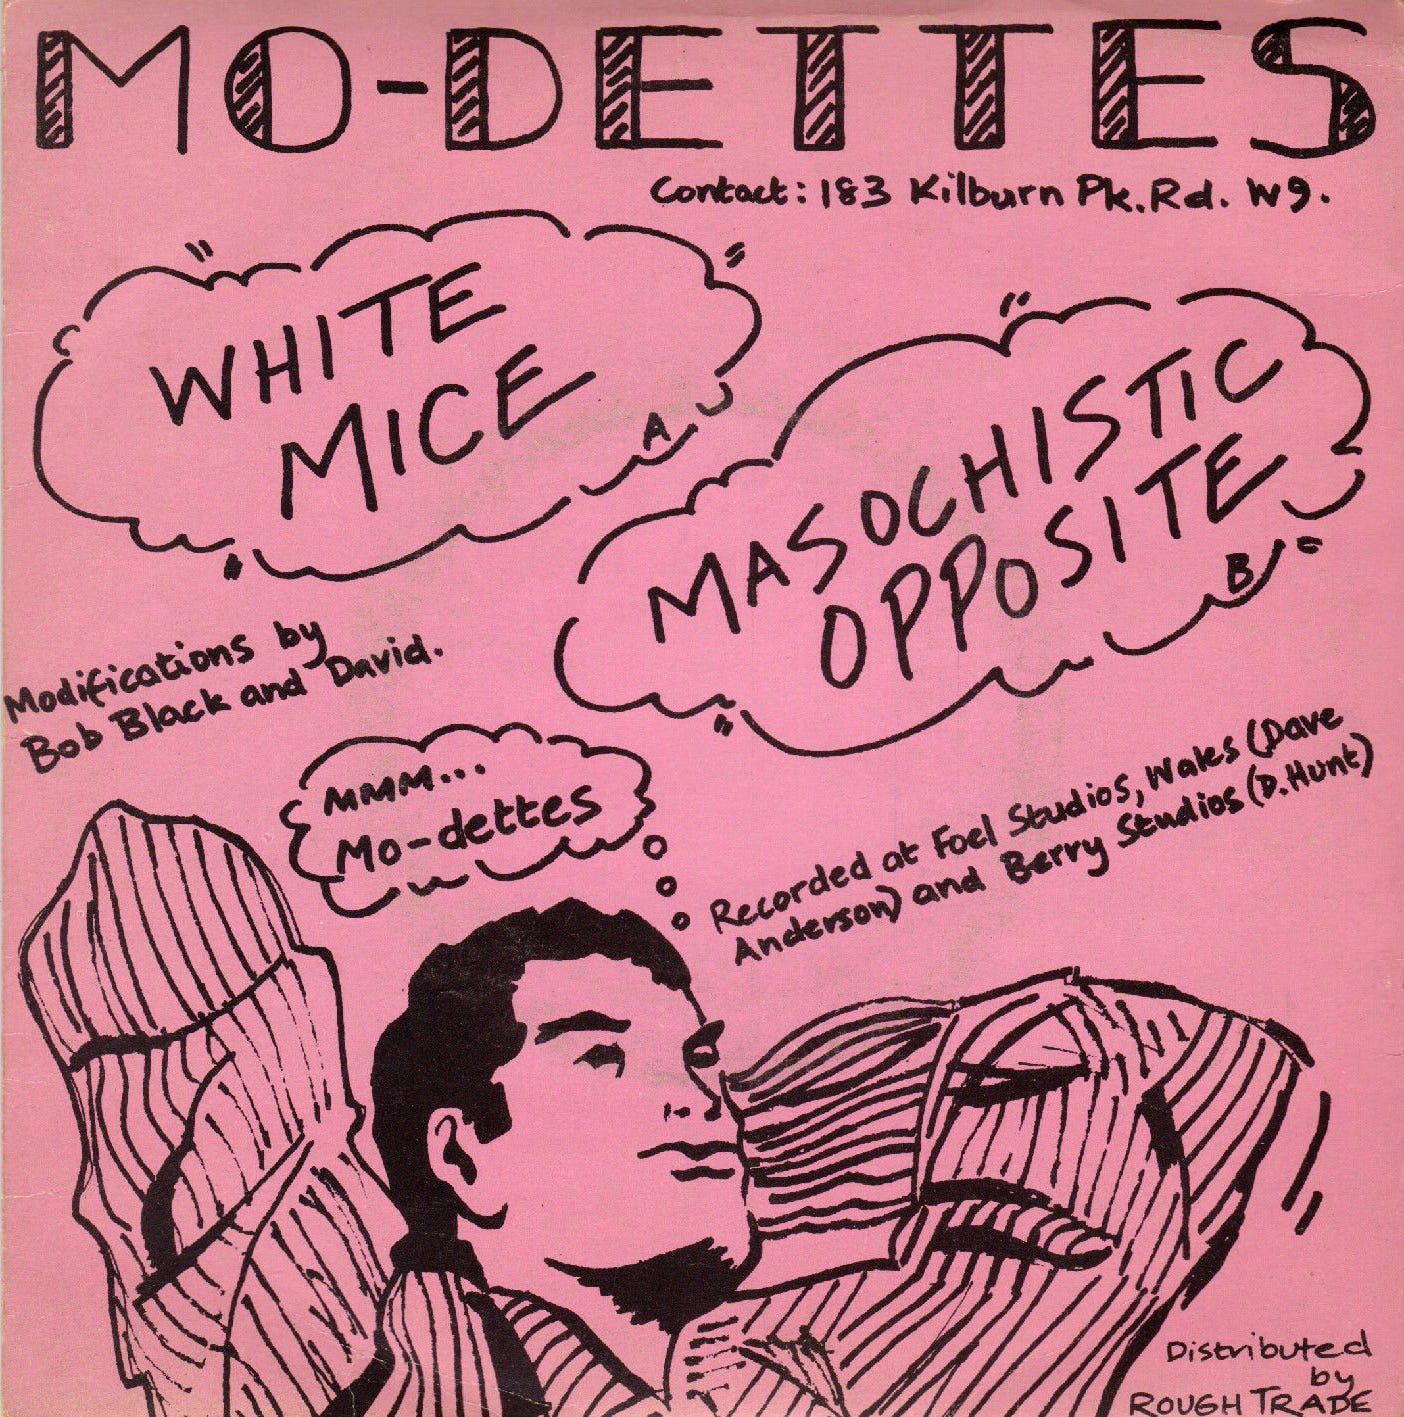 The cover of the "White mice" single: a pink background with hand-drawn image and writing. A picture of a man in shirtsleeves and the title of the single in a think-cloud.